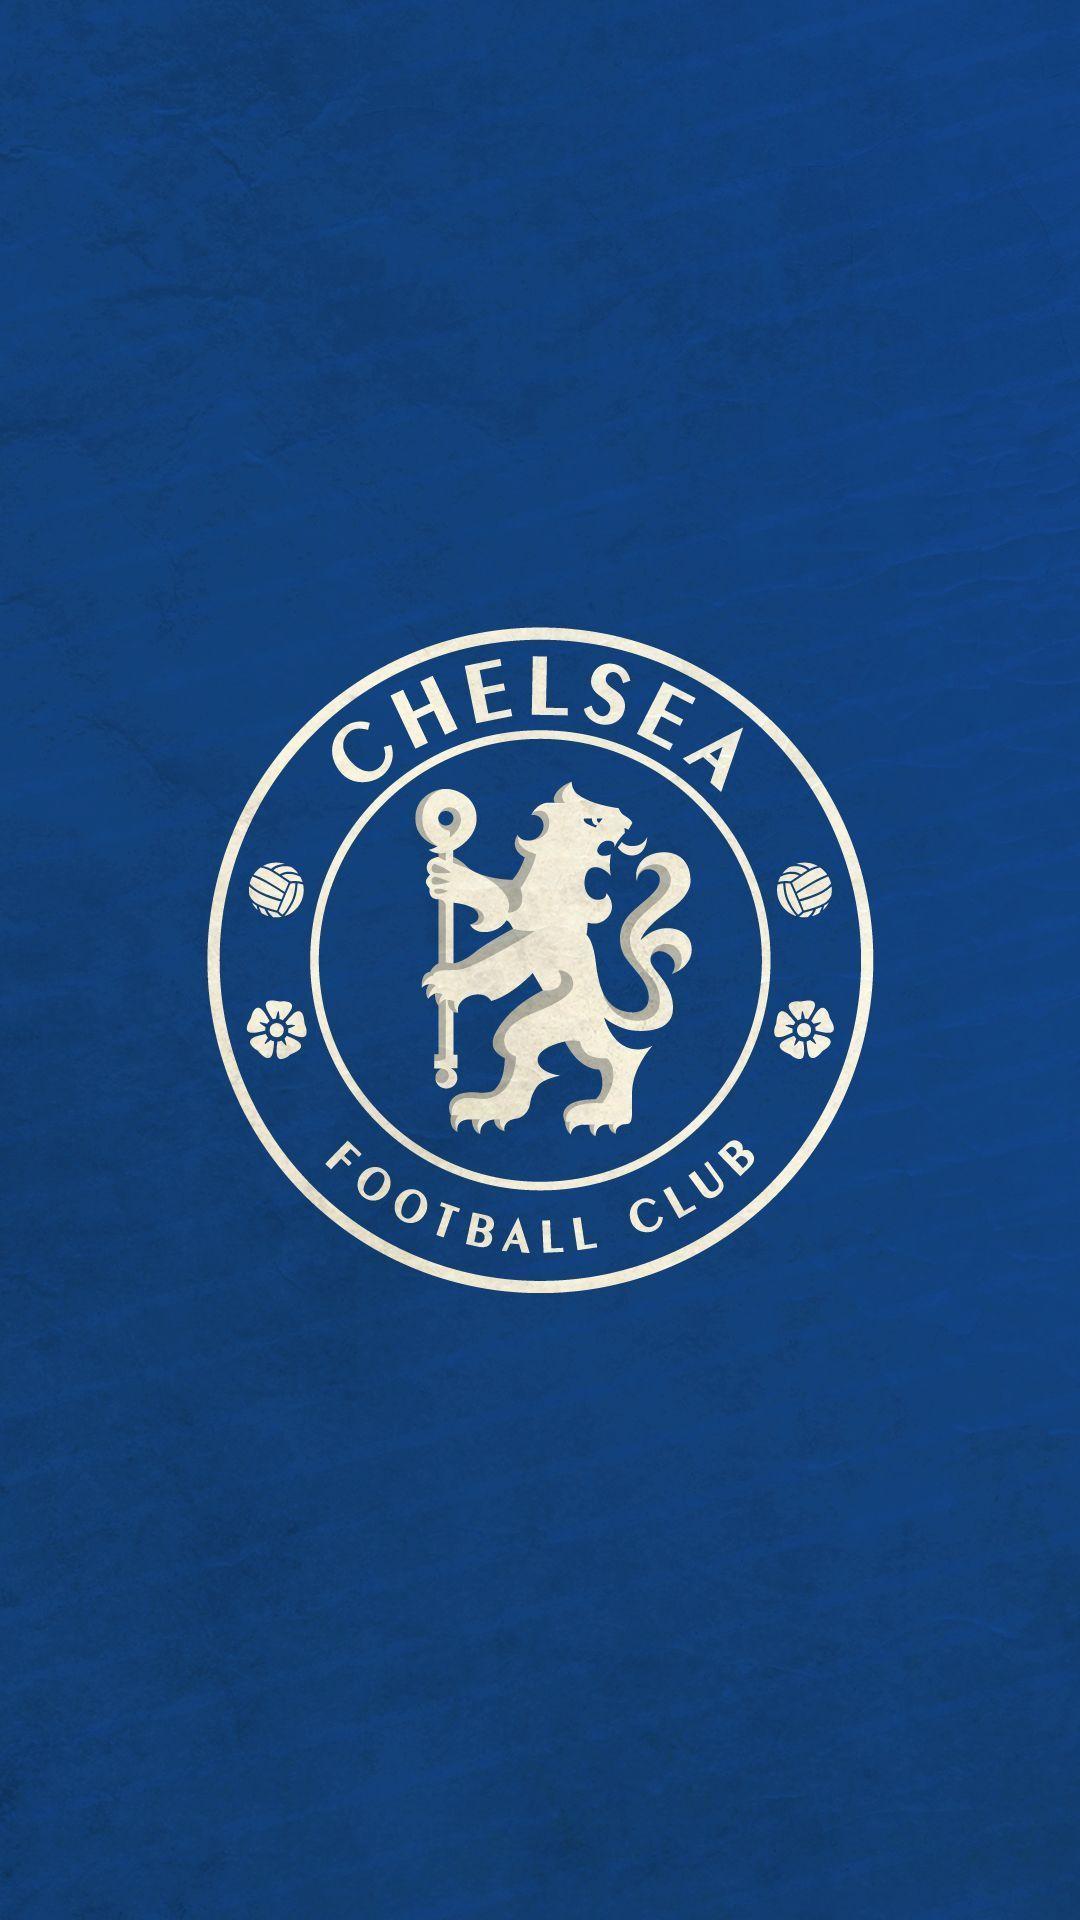 All You Need To Know About Football. Chelsea, Chelsea FC